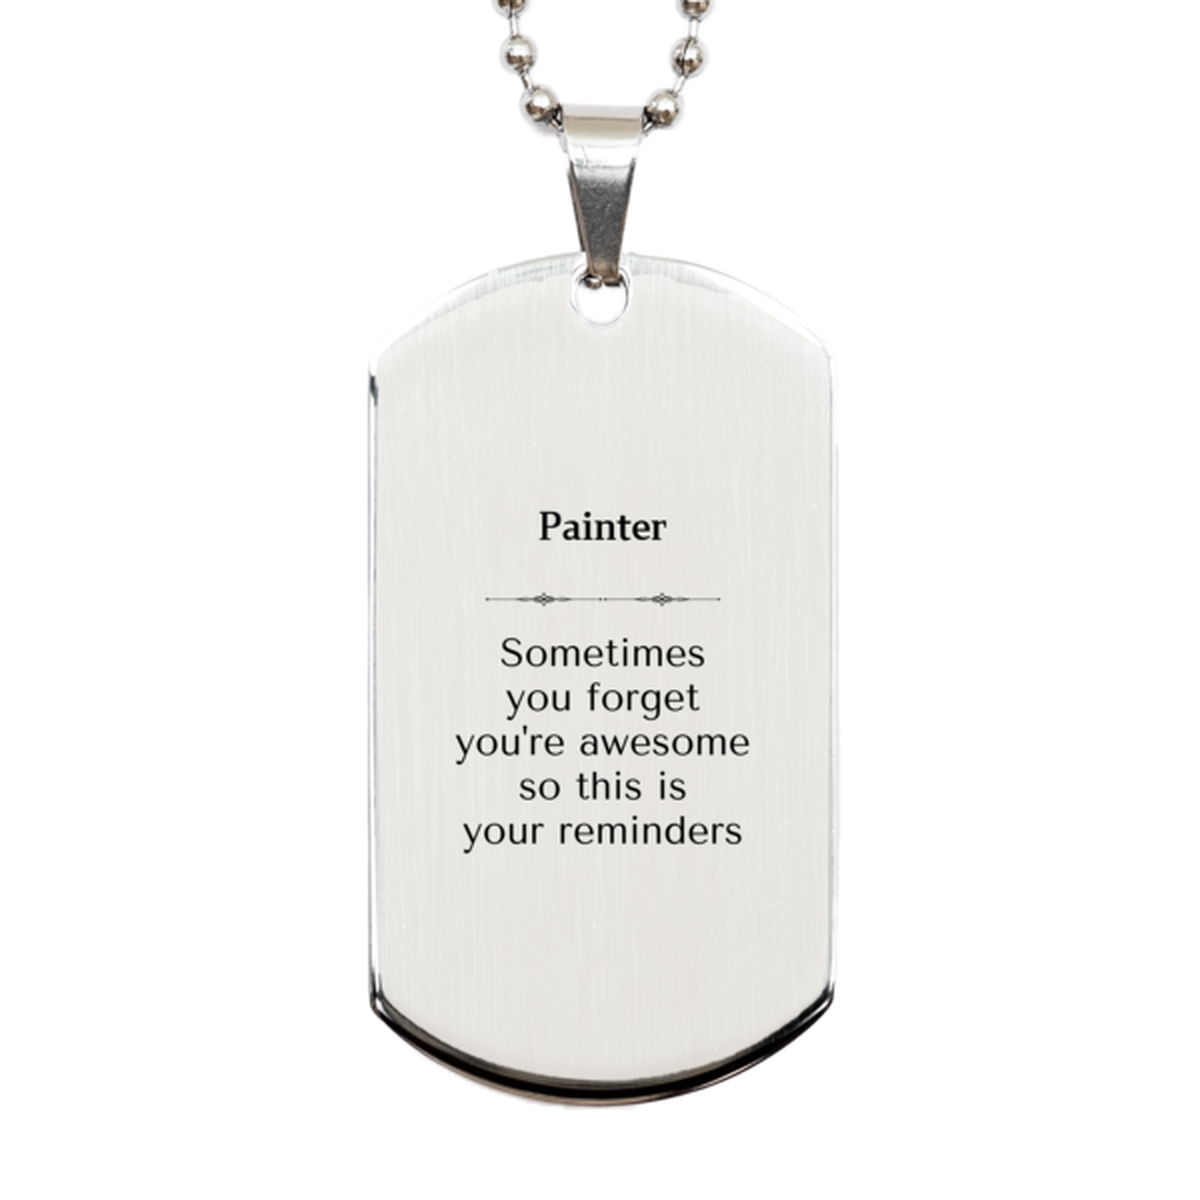 Sentimental Painter Silver Dog Tag, Painter Sometimes you forget you're awesome so this is your reminders, Graduation Christmas Birthday Gifts for Painter, Men, Women, Coworkers